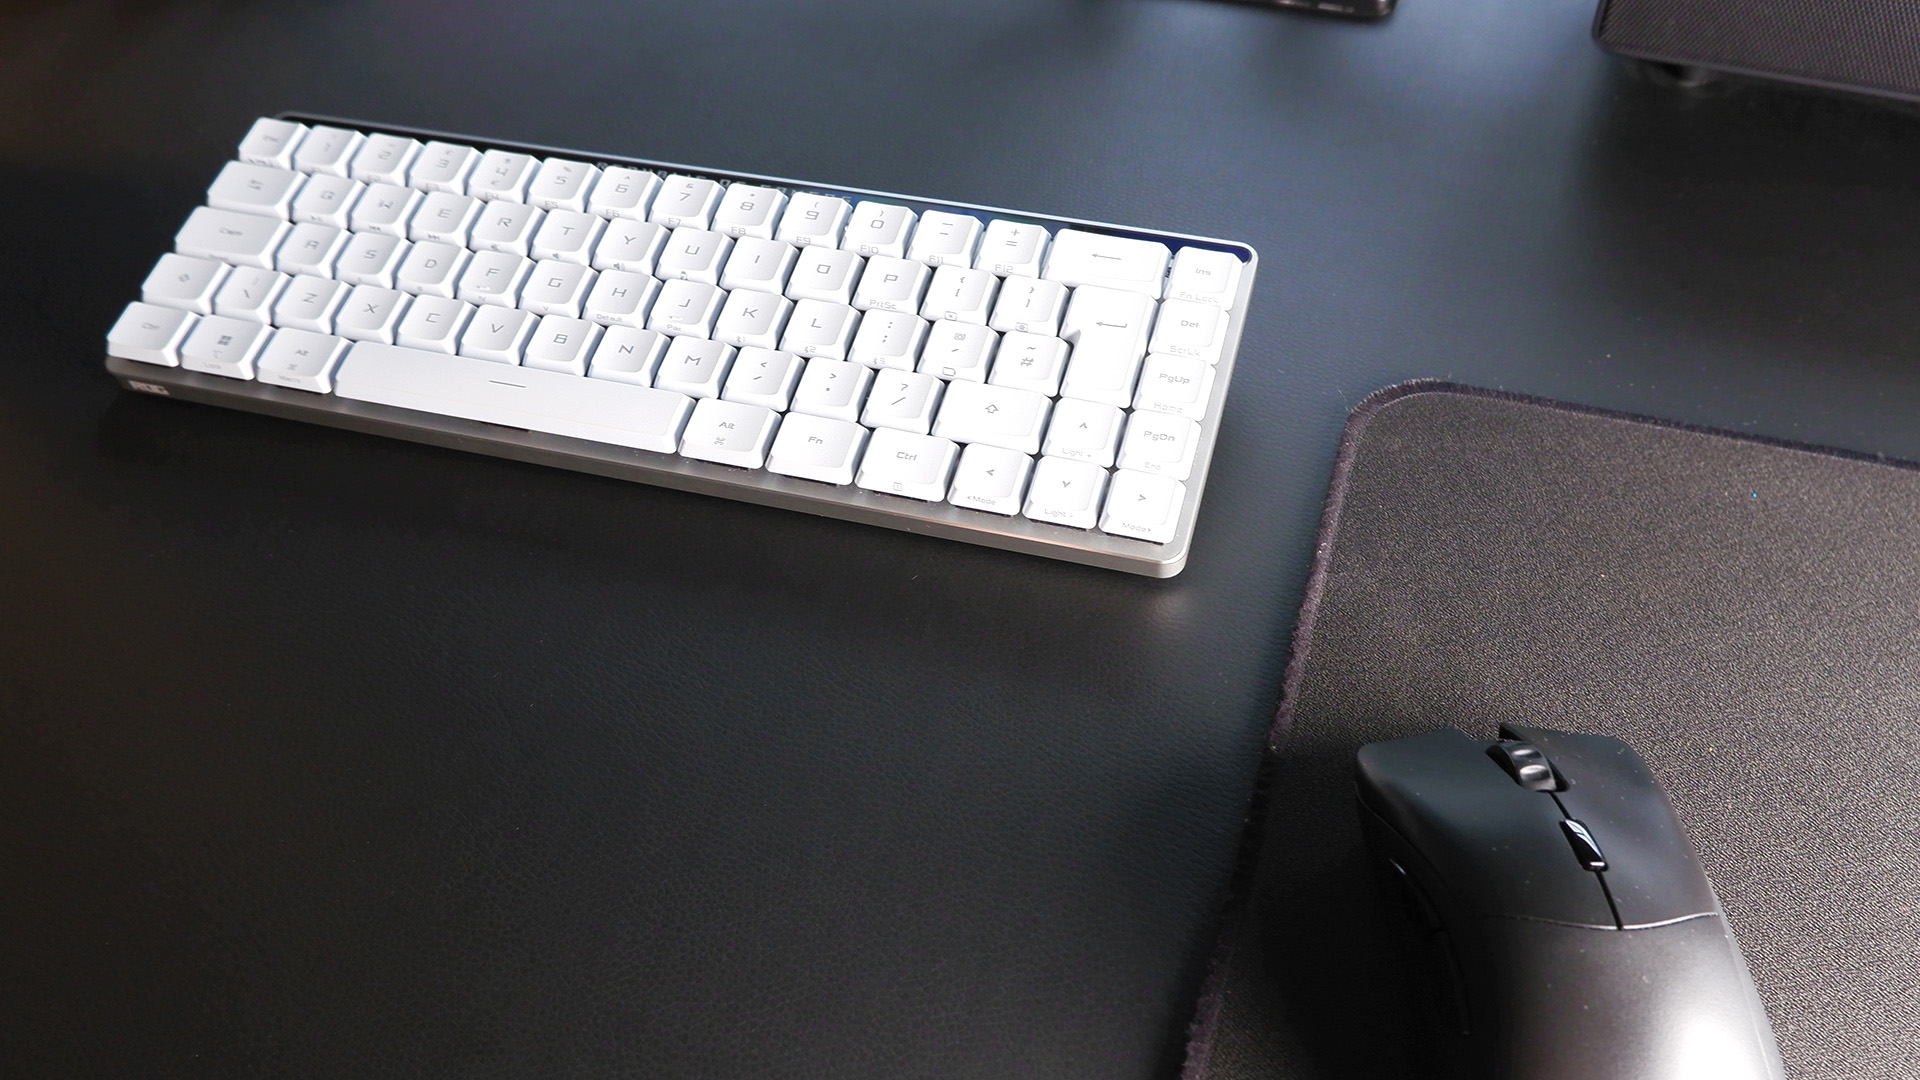 The ROG Falchion RX gaming keyboard in white set up on a desk.